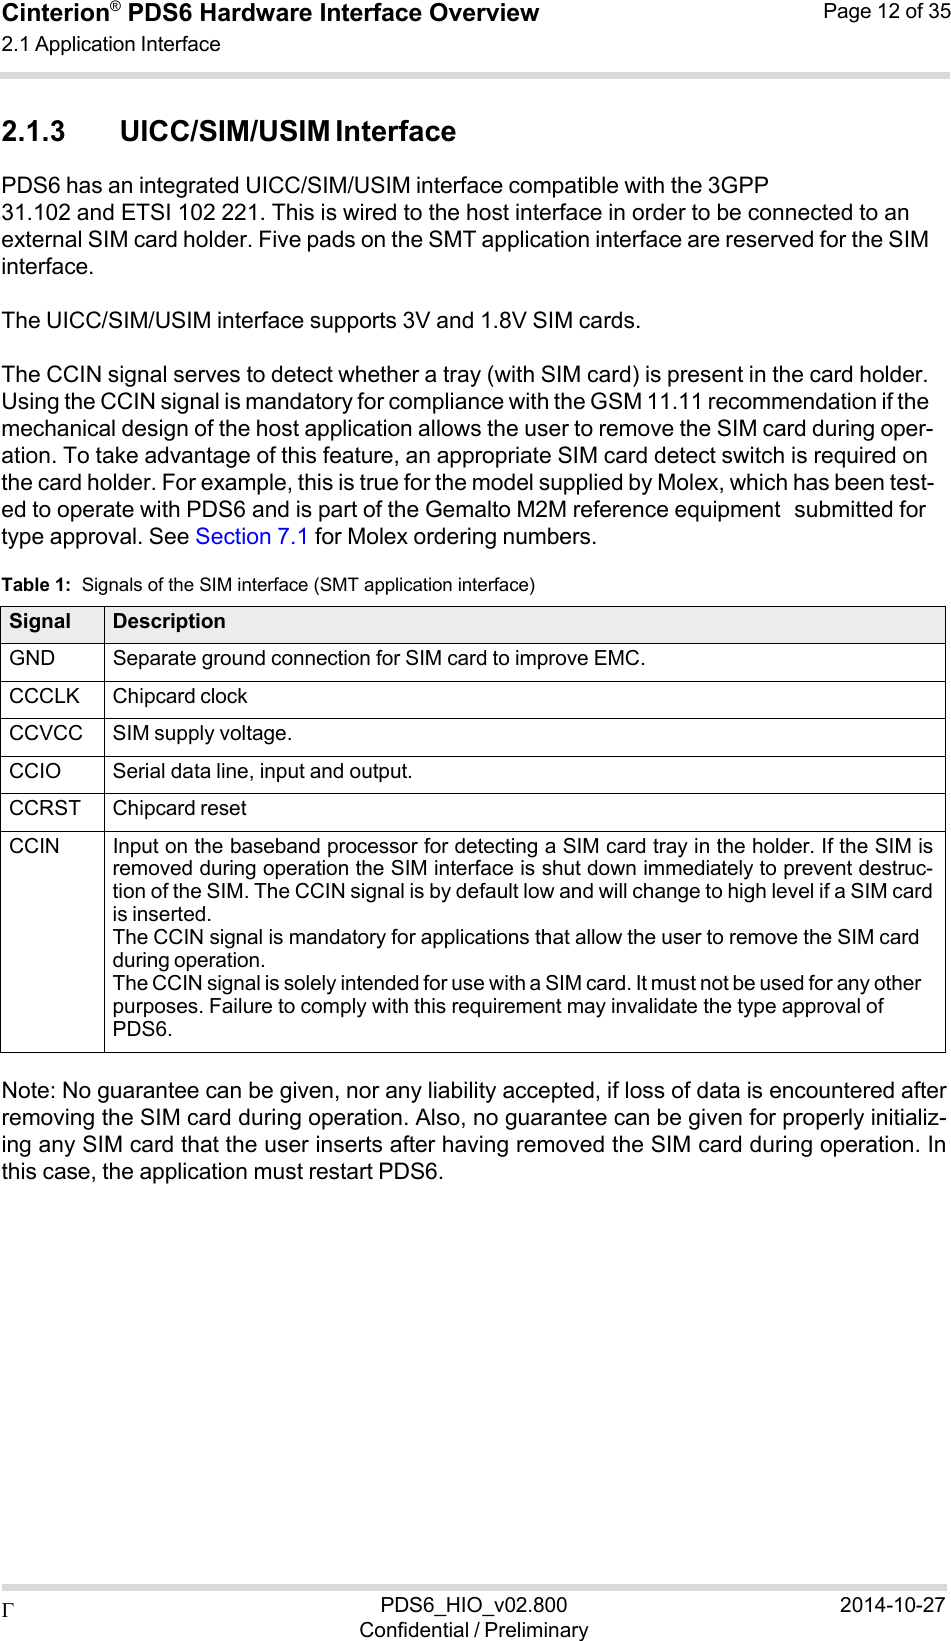  PDS6_HIO_v02.800Confidential / Preliminary2014-10-27Cinterion®  PDS6 Hardware Interface Overview 2.1 Application Interface Page 12 of 35   2.1.3 UICC/SIM/USIM Interface PDS6 has an integrated UICC/SIM/USIM interface compatible with the 3GPP 31.102 and ETSI 102 221. This is wired to the host interface in order to be connected to an external SIM card holder. Five pads on the SMT application interface are reserved for the SIM interface.  The UICC/SIM/USIM interface supports 3V and 1.8V SIM cards.  The CCIN signal serves to detect whether a tray (with SIM card) is present in the card holder. Using the CCIN signal is mandatory for compliance with the GSM 11.11 recommendation if the mechanical design of the host application allows the user to remove the SIM card during oper- ation. To take advantage of this feature, an appropriate SIM card detect switch is required on the card holder. For example, this is true for the model supplied by Molex, which has been test- ed to operate with PDS6 and is part of the Gemalto M2M reference equipment submitted for type approval. See Section 7.1 for Molex ordering numbers.  Table 1:  Signals of the SIM interface (SMT application interface)  Signal DescriptionGND Separate ground connection for SIM card to improve EMC.CCCLK Chipcard clock CCVCC SIM supply voltage. CCIO Serial data line, input and output.CCRST Chipcard reset CCIN Input on the baseband processor for detecting a SIM card tray in the holder. If the SIM is removed during operation the SIM interface is shut down immediately to prevent destruc-tion of the SIM. The CCIN signal is by default low and will change to high level if a SIM card is inserted. The CCIN signal is mandatory for applications that allow the user to remove the SIM card during operation. The CCIN signal is solely intended for use with a SIM card. It must not be used for any other purposes. Failure to comply with this requirement may invalidate the type approval of PDS6.  Note: No guarantee can be given, nor any liability accepted, if loss of data is encountered after removing the SIM card during operation. Also, no guarantee can be given for properly initializ- ing any SIM card that the user inserts after having removed the SIM card during operation. In this case, the application must restart PDS6. 